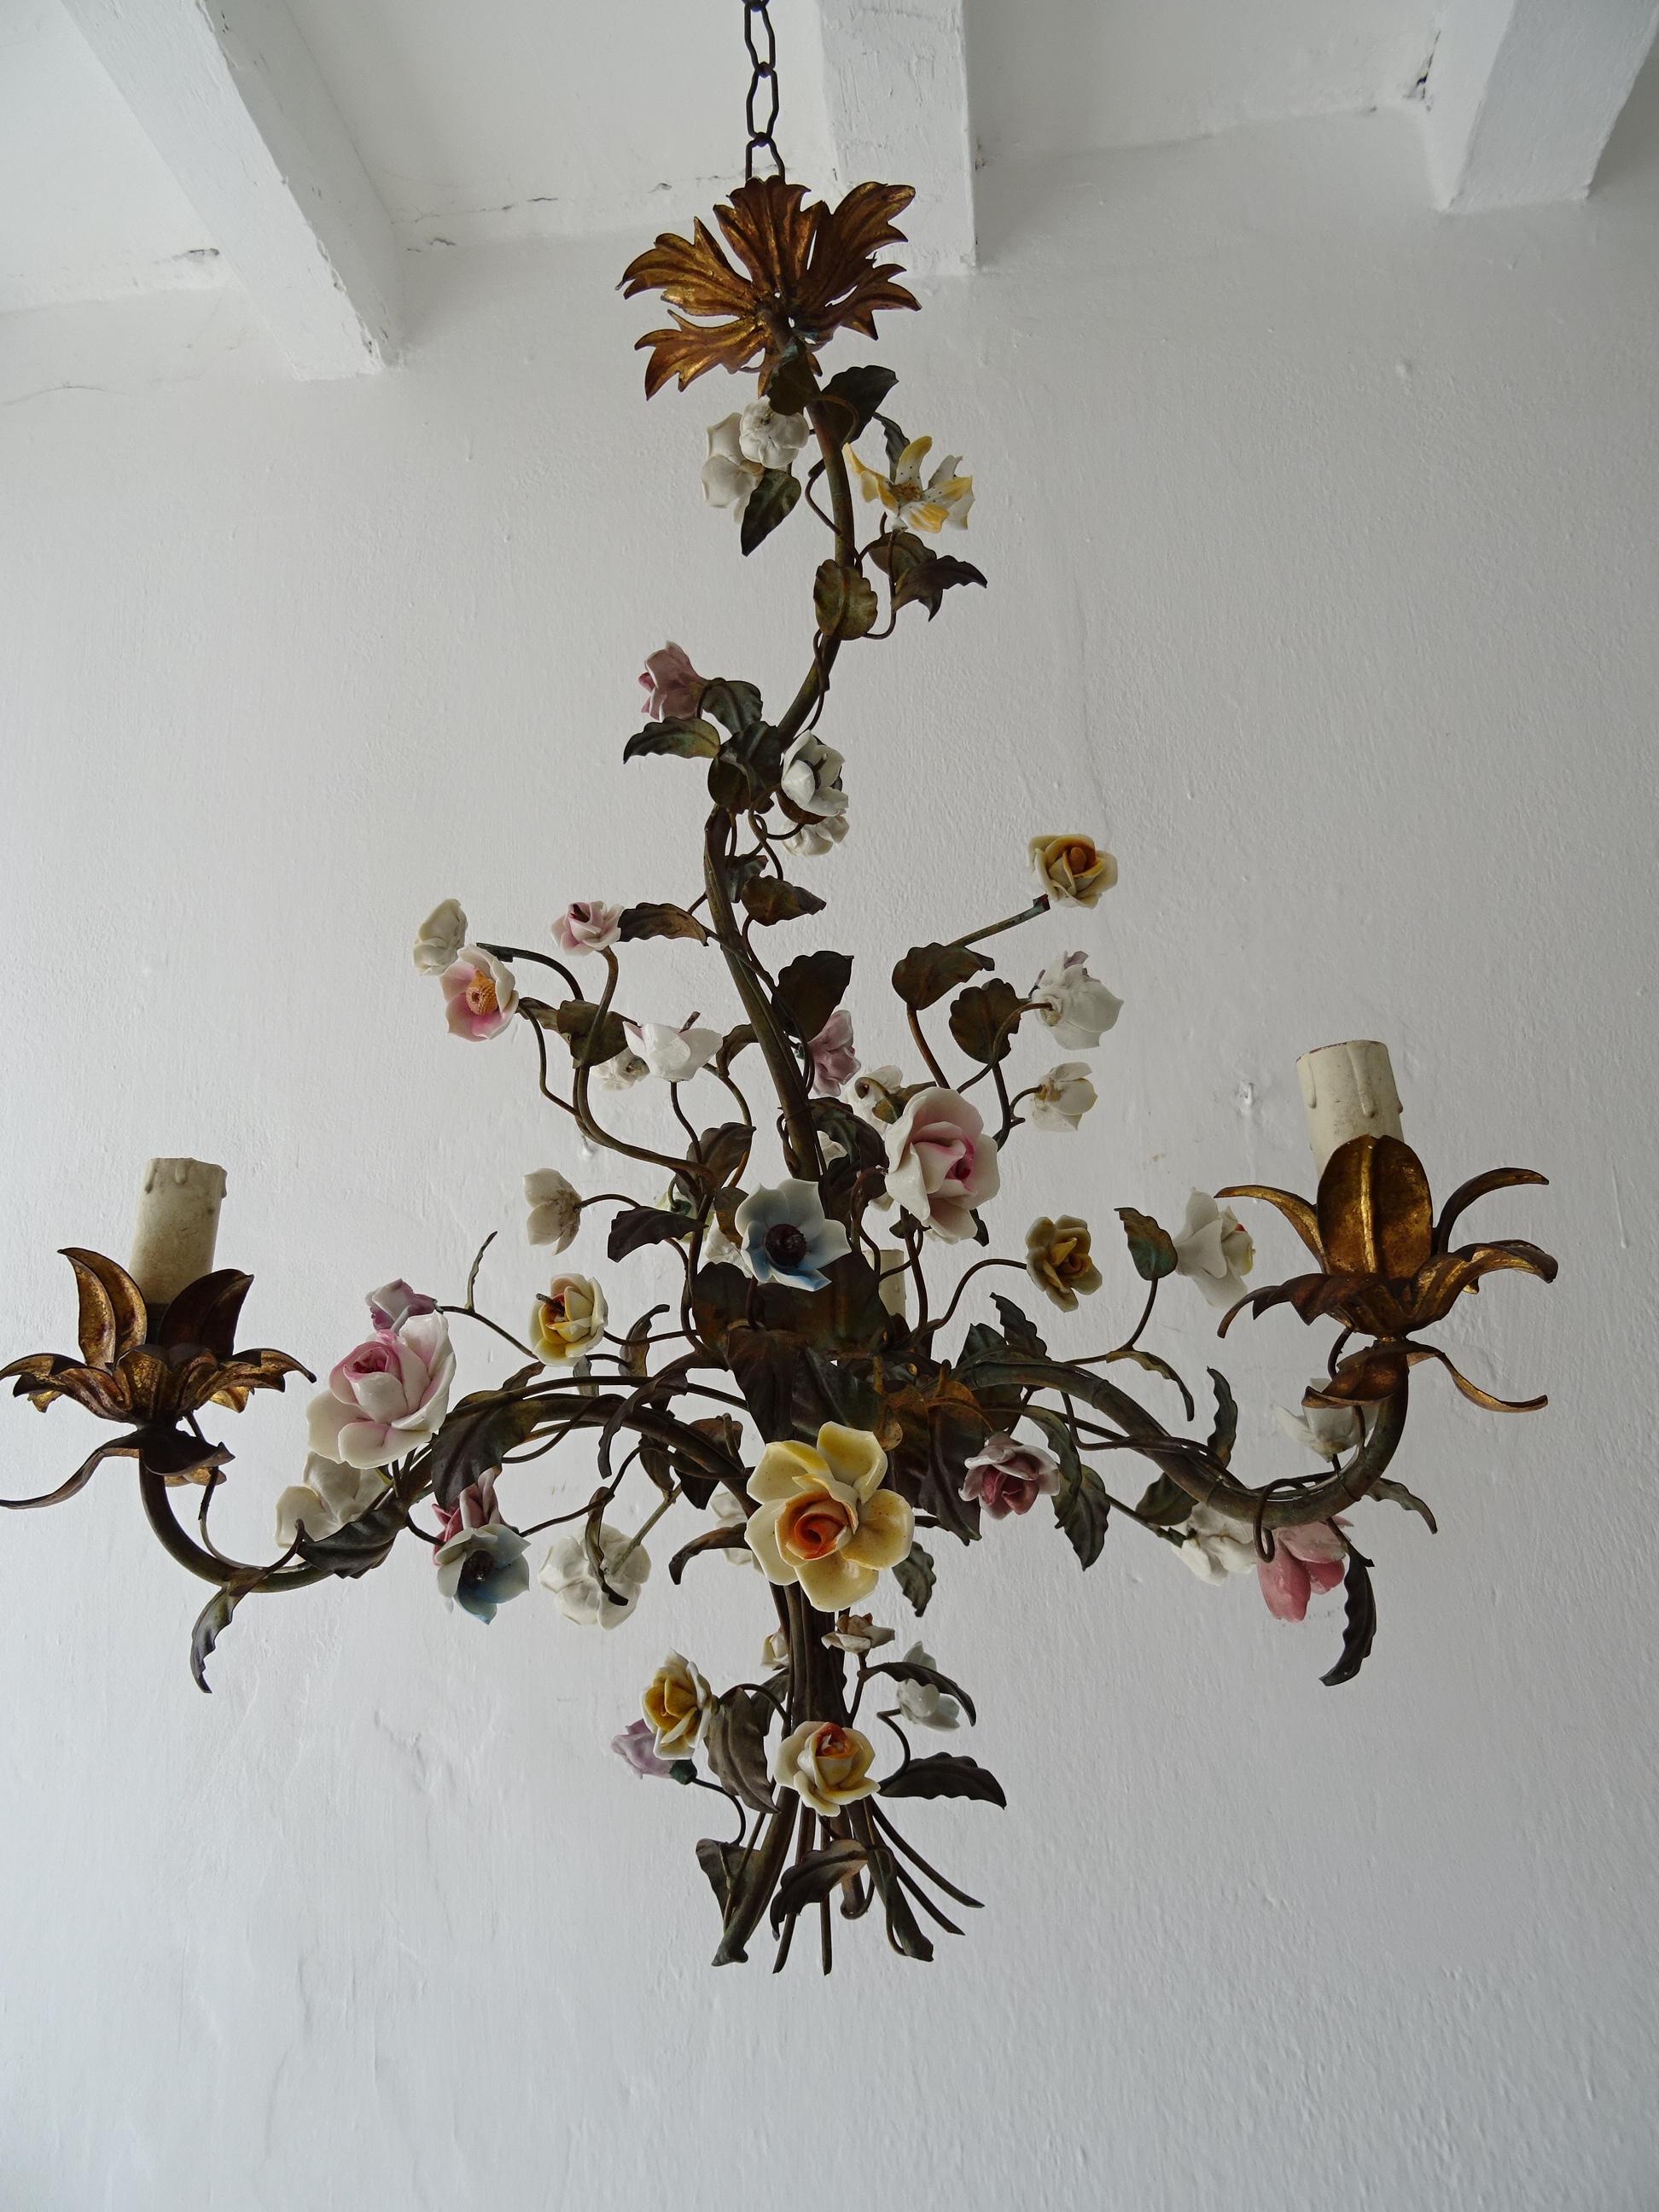 Housing 3 lights. Original color tole with gold bulb holders, top and canopy. Big and small handmade porcelain flowers. Extremely rare, these were never exported to the USA. Adding 12 inches of original chain and canopy. Will be newly re-wired with